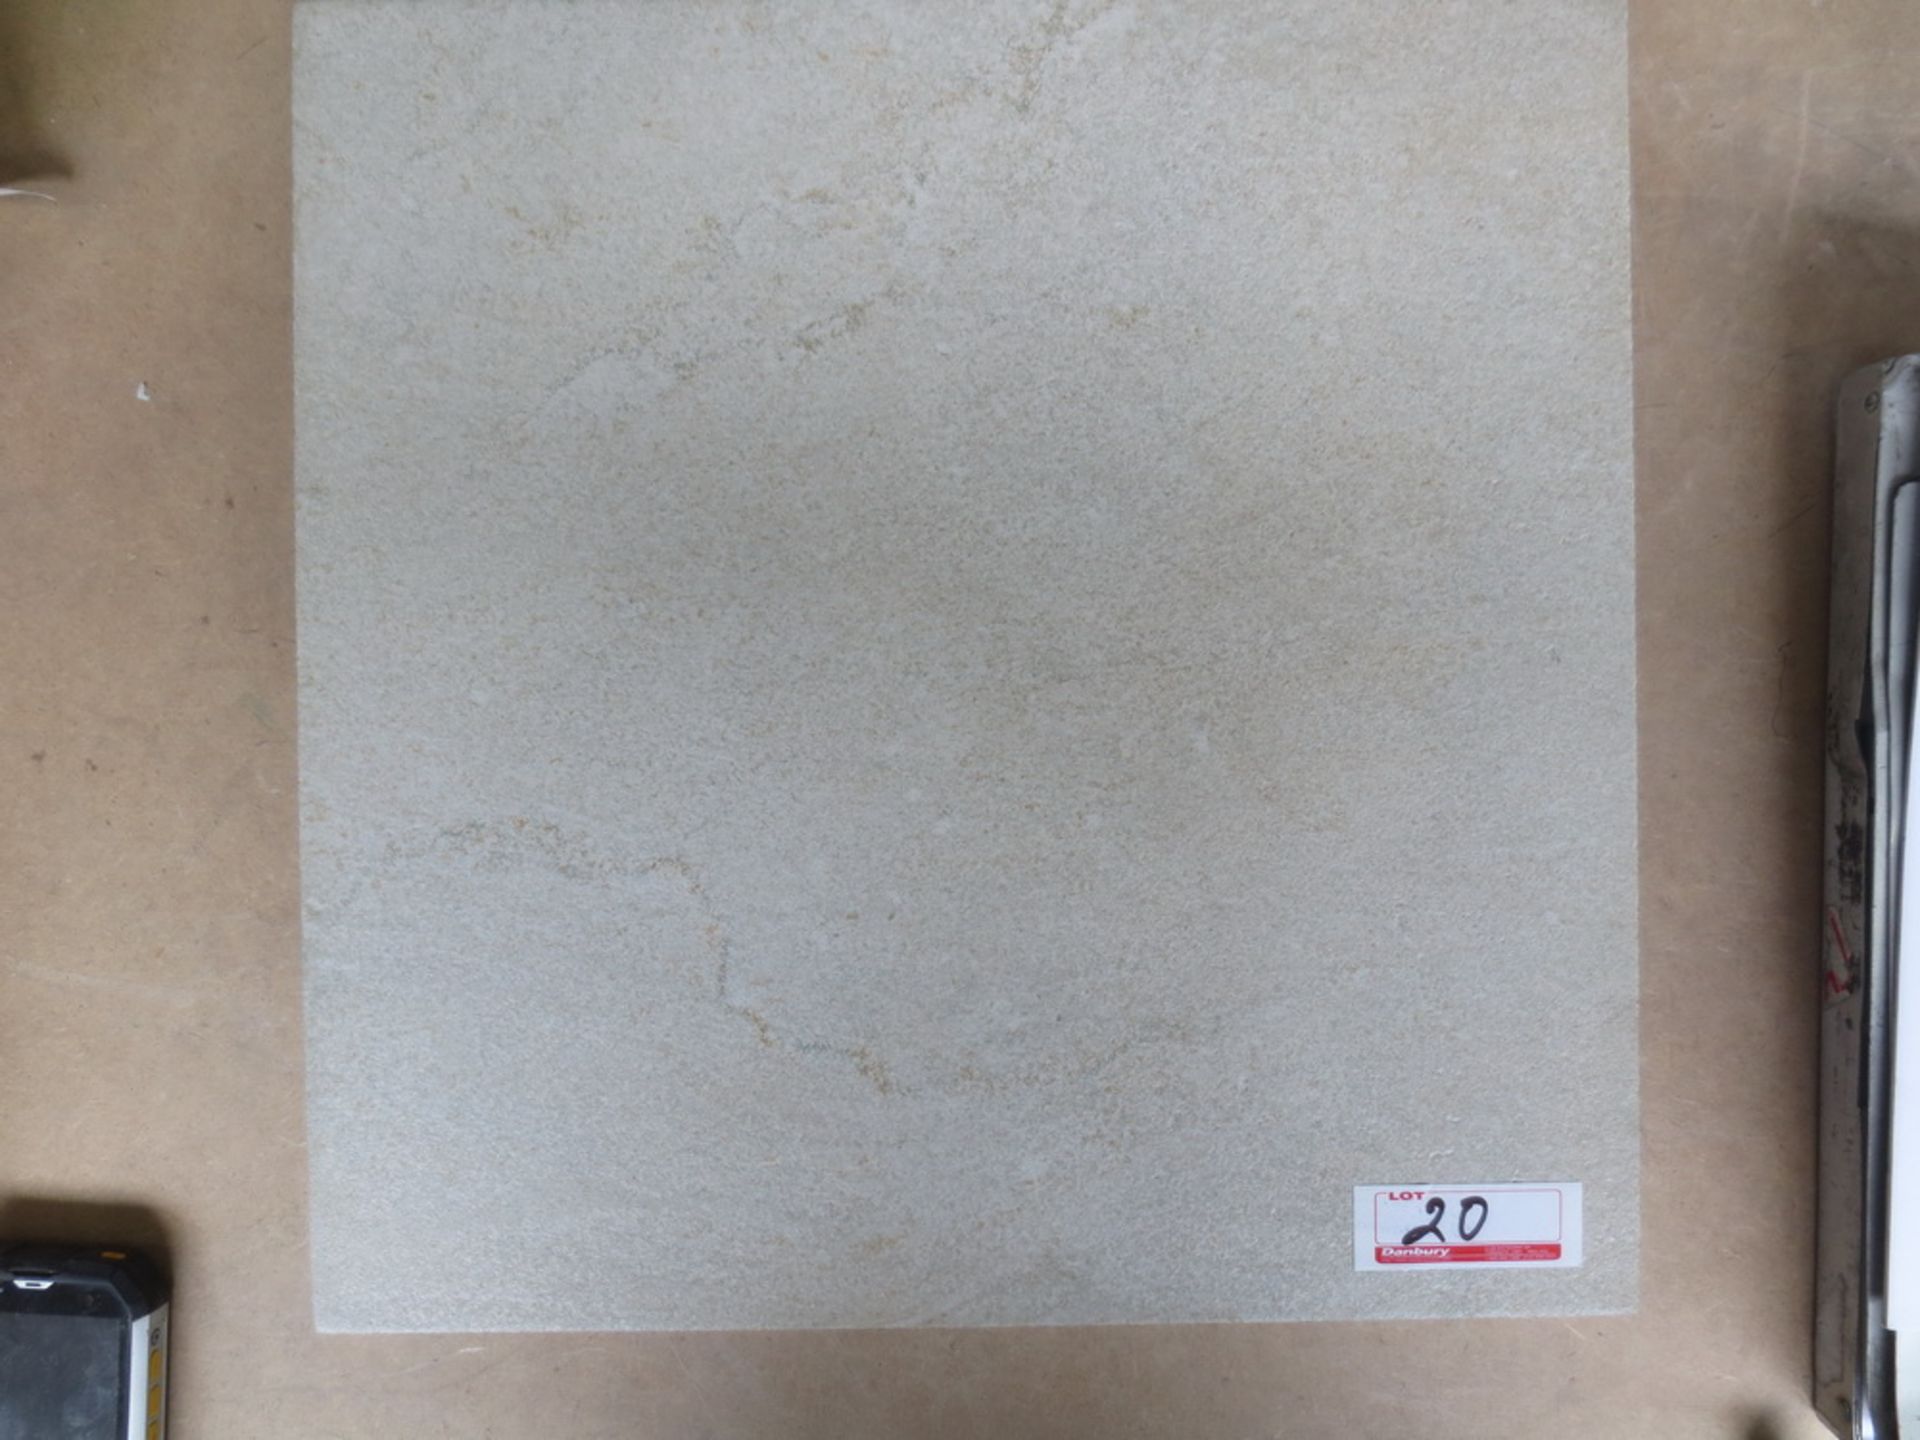 485 - SQ. FT. BEIGE APPROX 15.5X15.5 CERAMIC TILE 40 BOXES